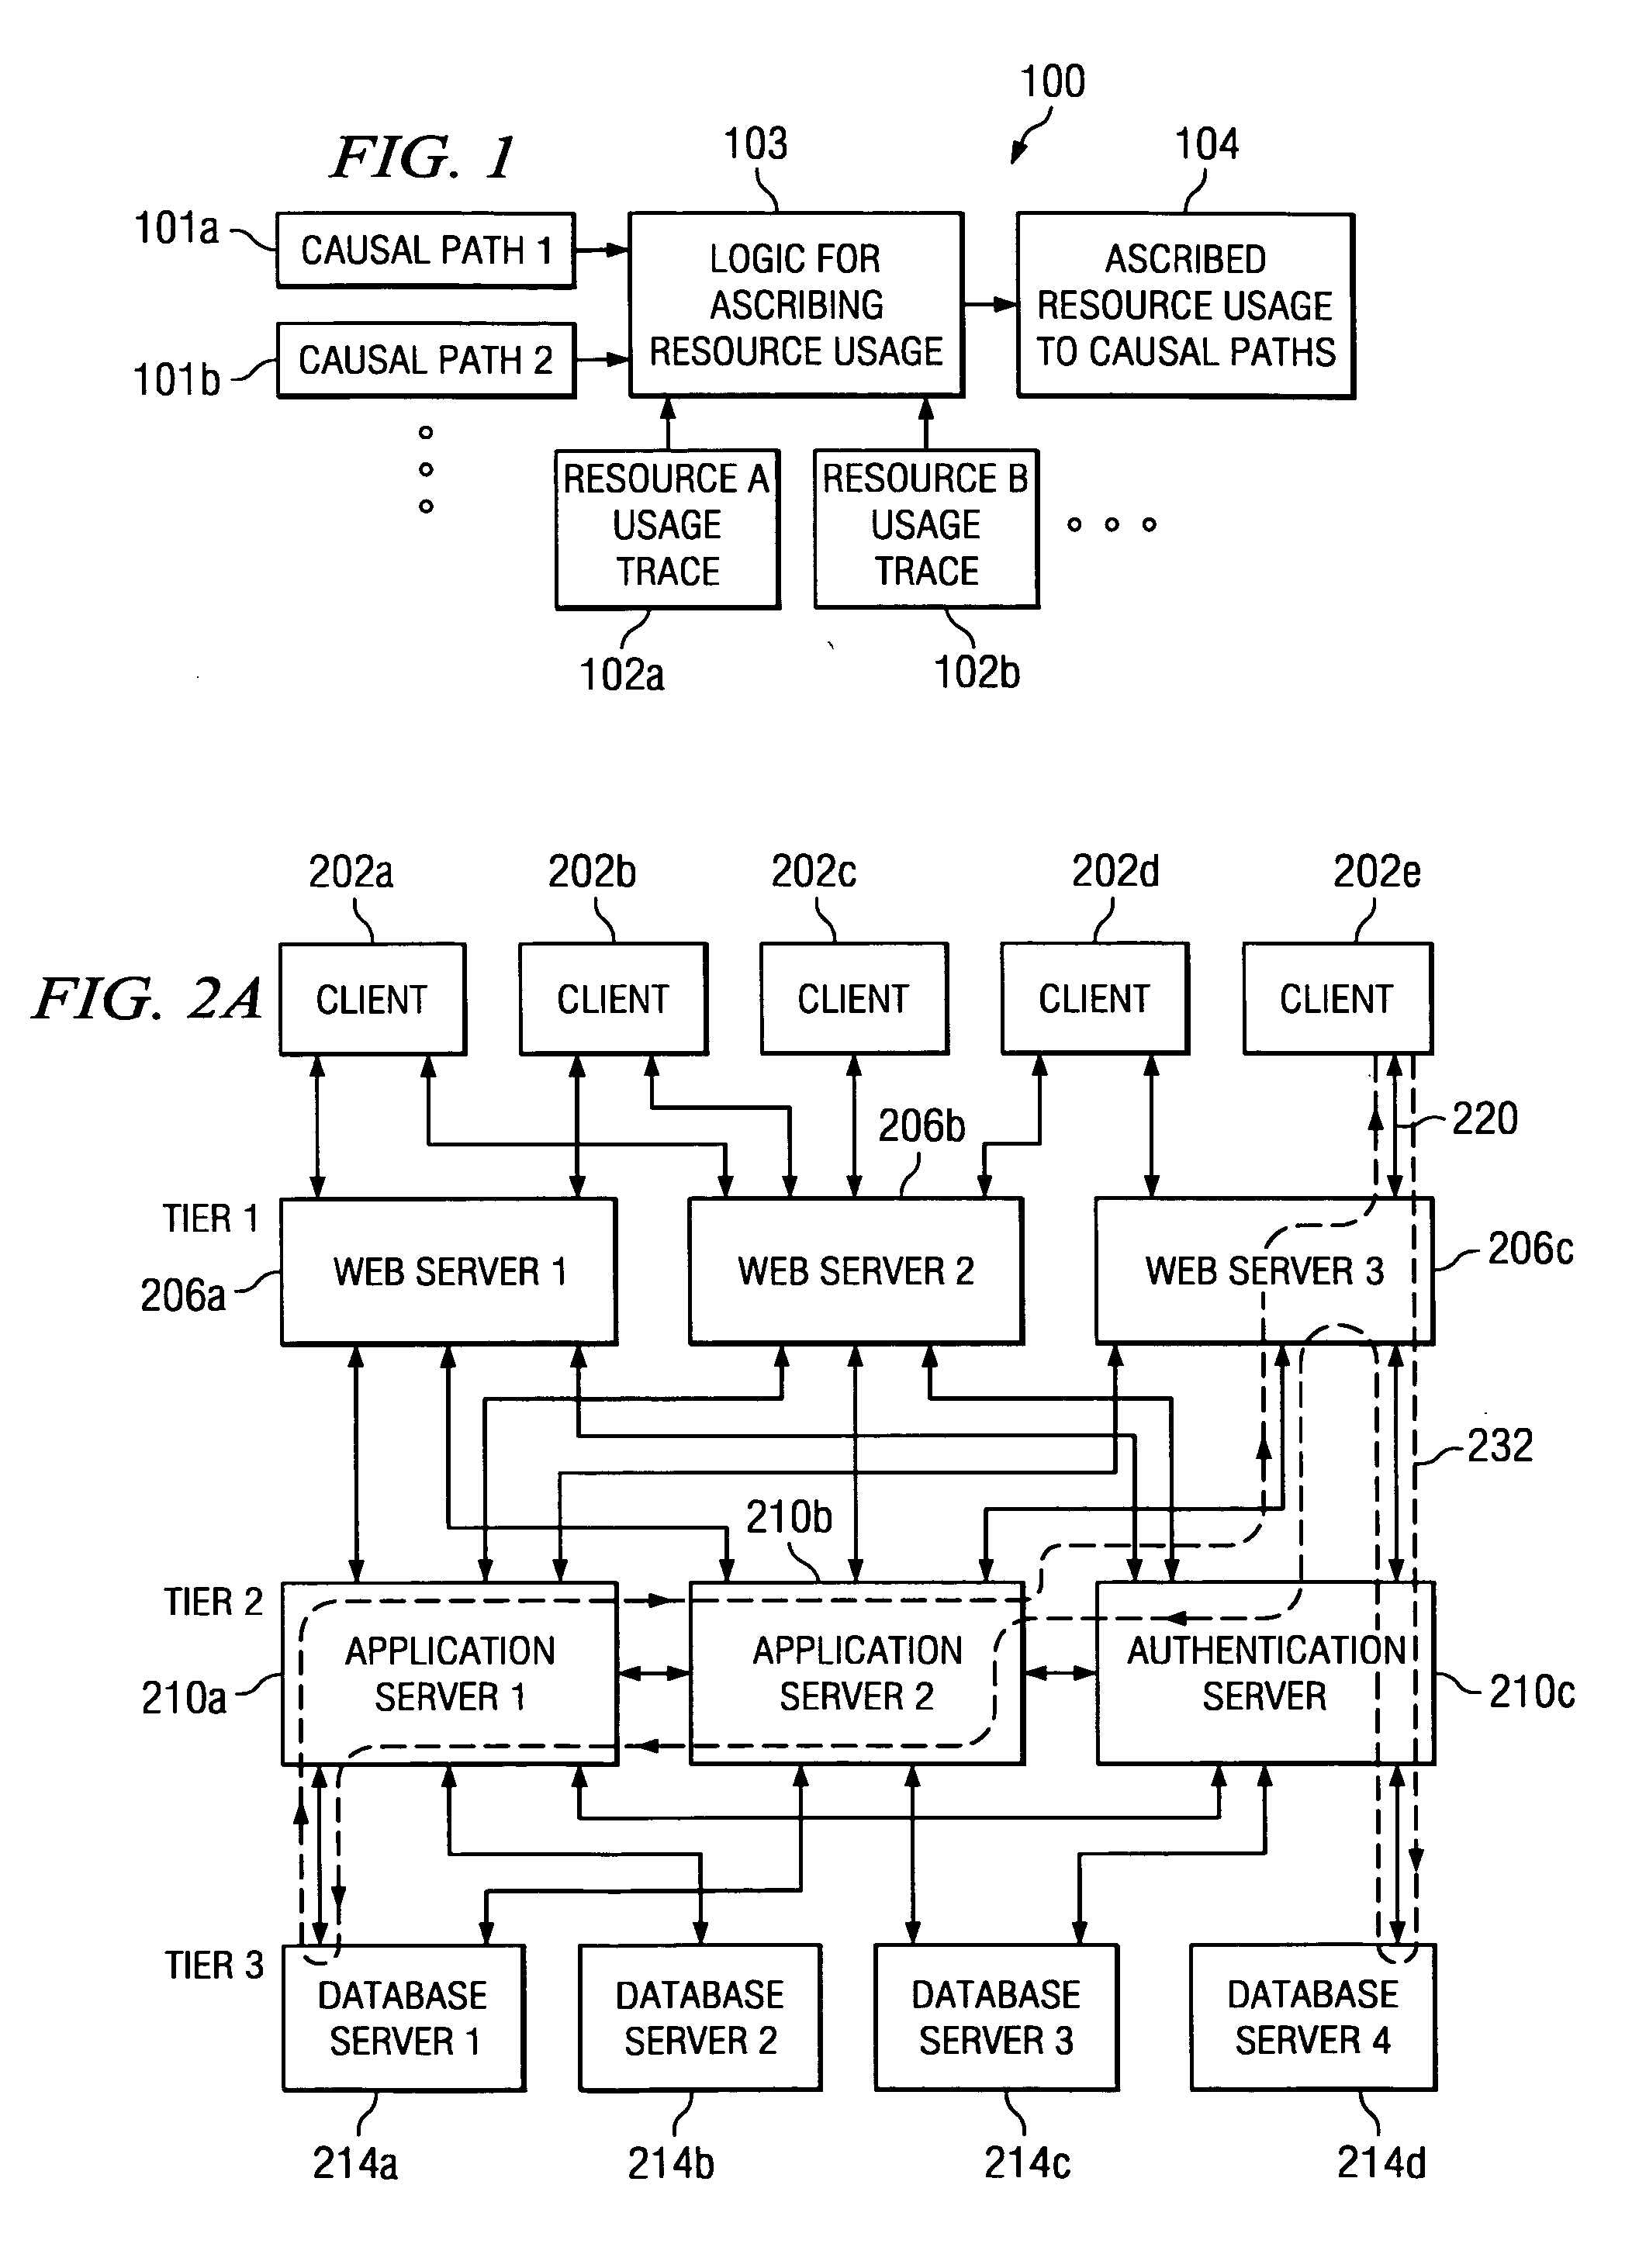 System and method for ascribing resource consumption to activity in a causal path of a node of a distributed computing system